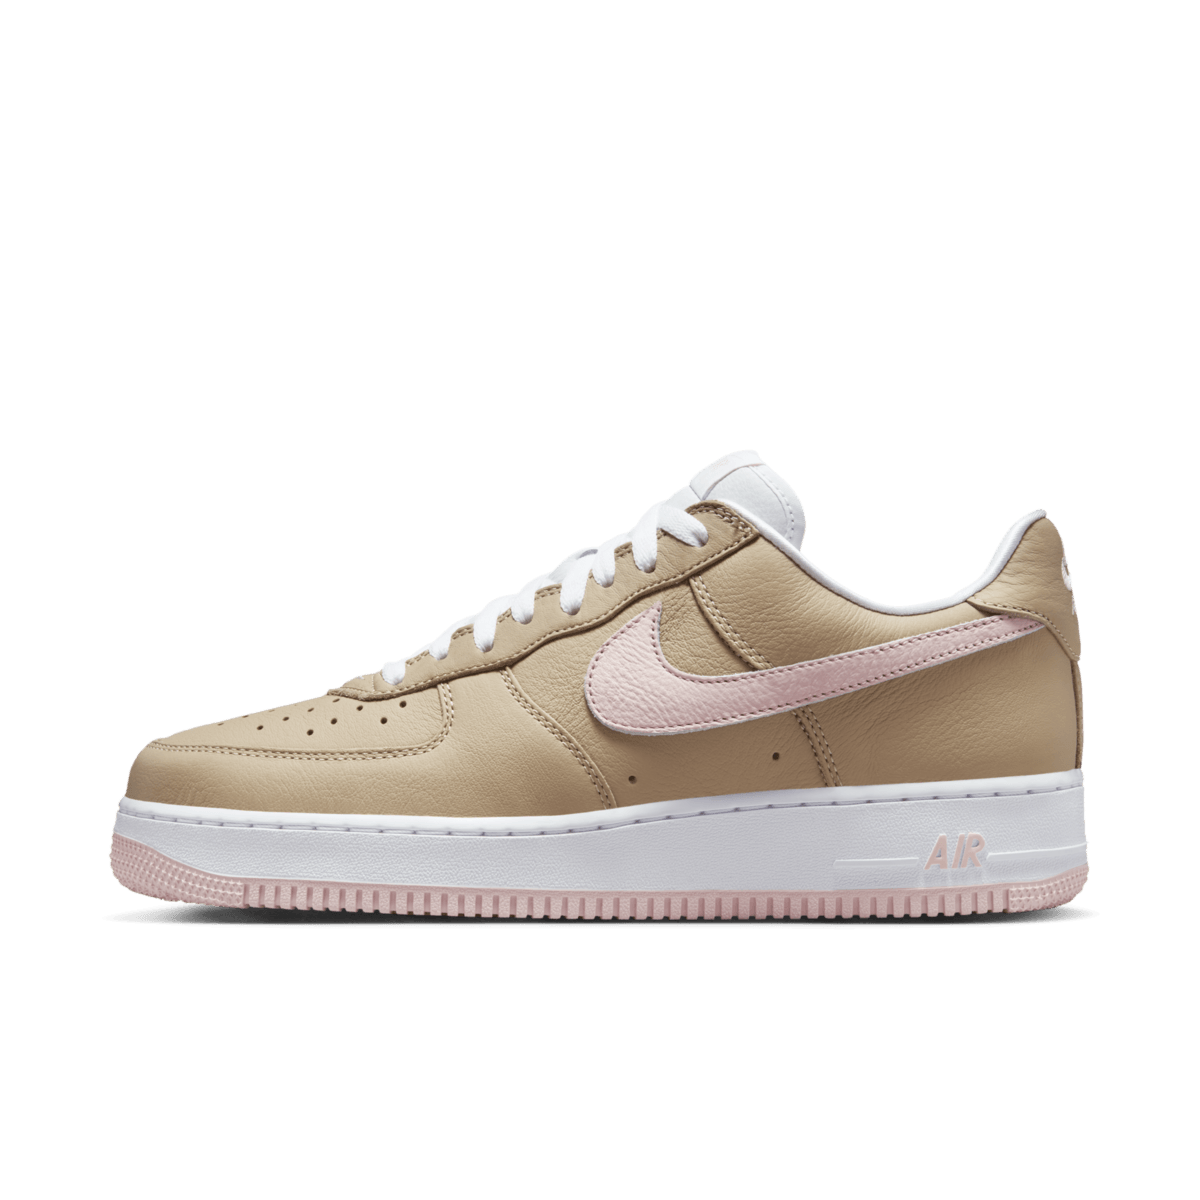 Nike Air Force 1 Low Retro 'Linen' 845053-201